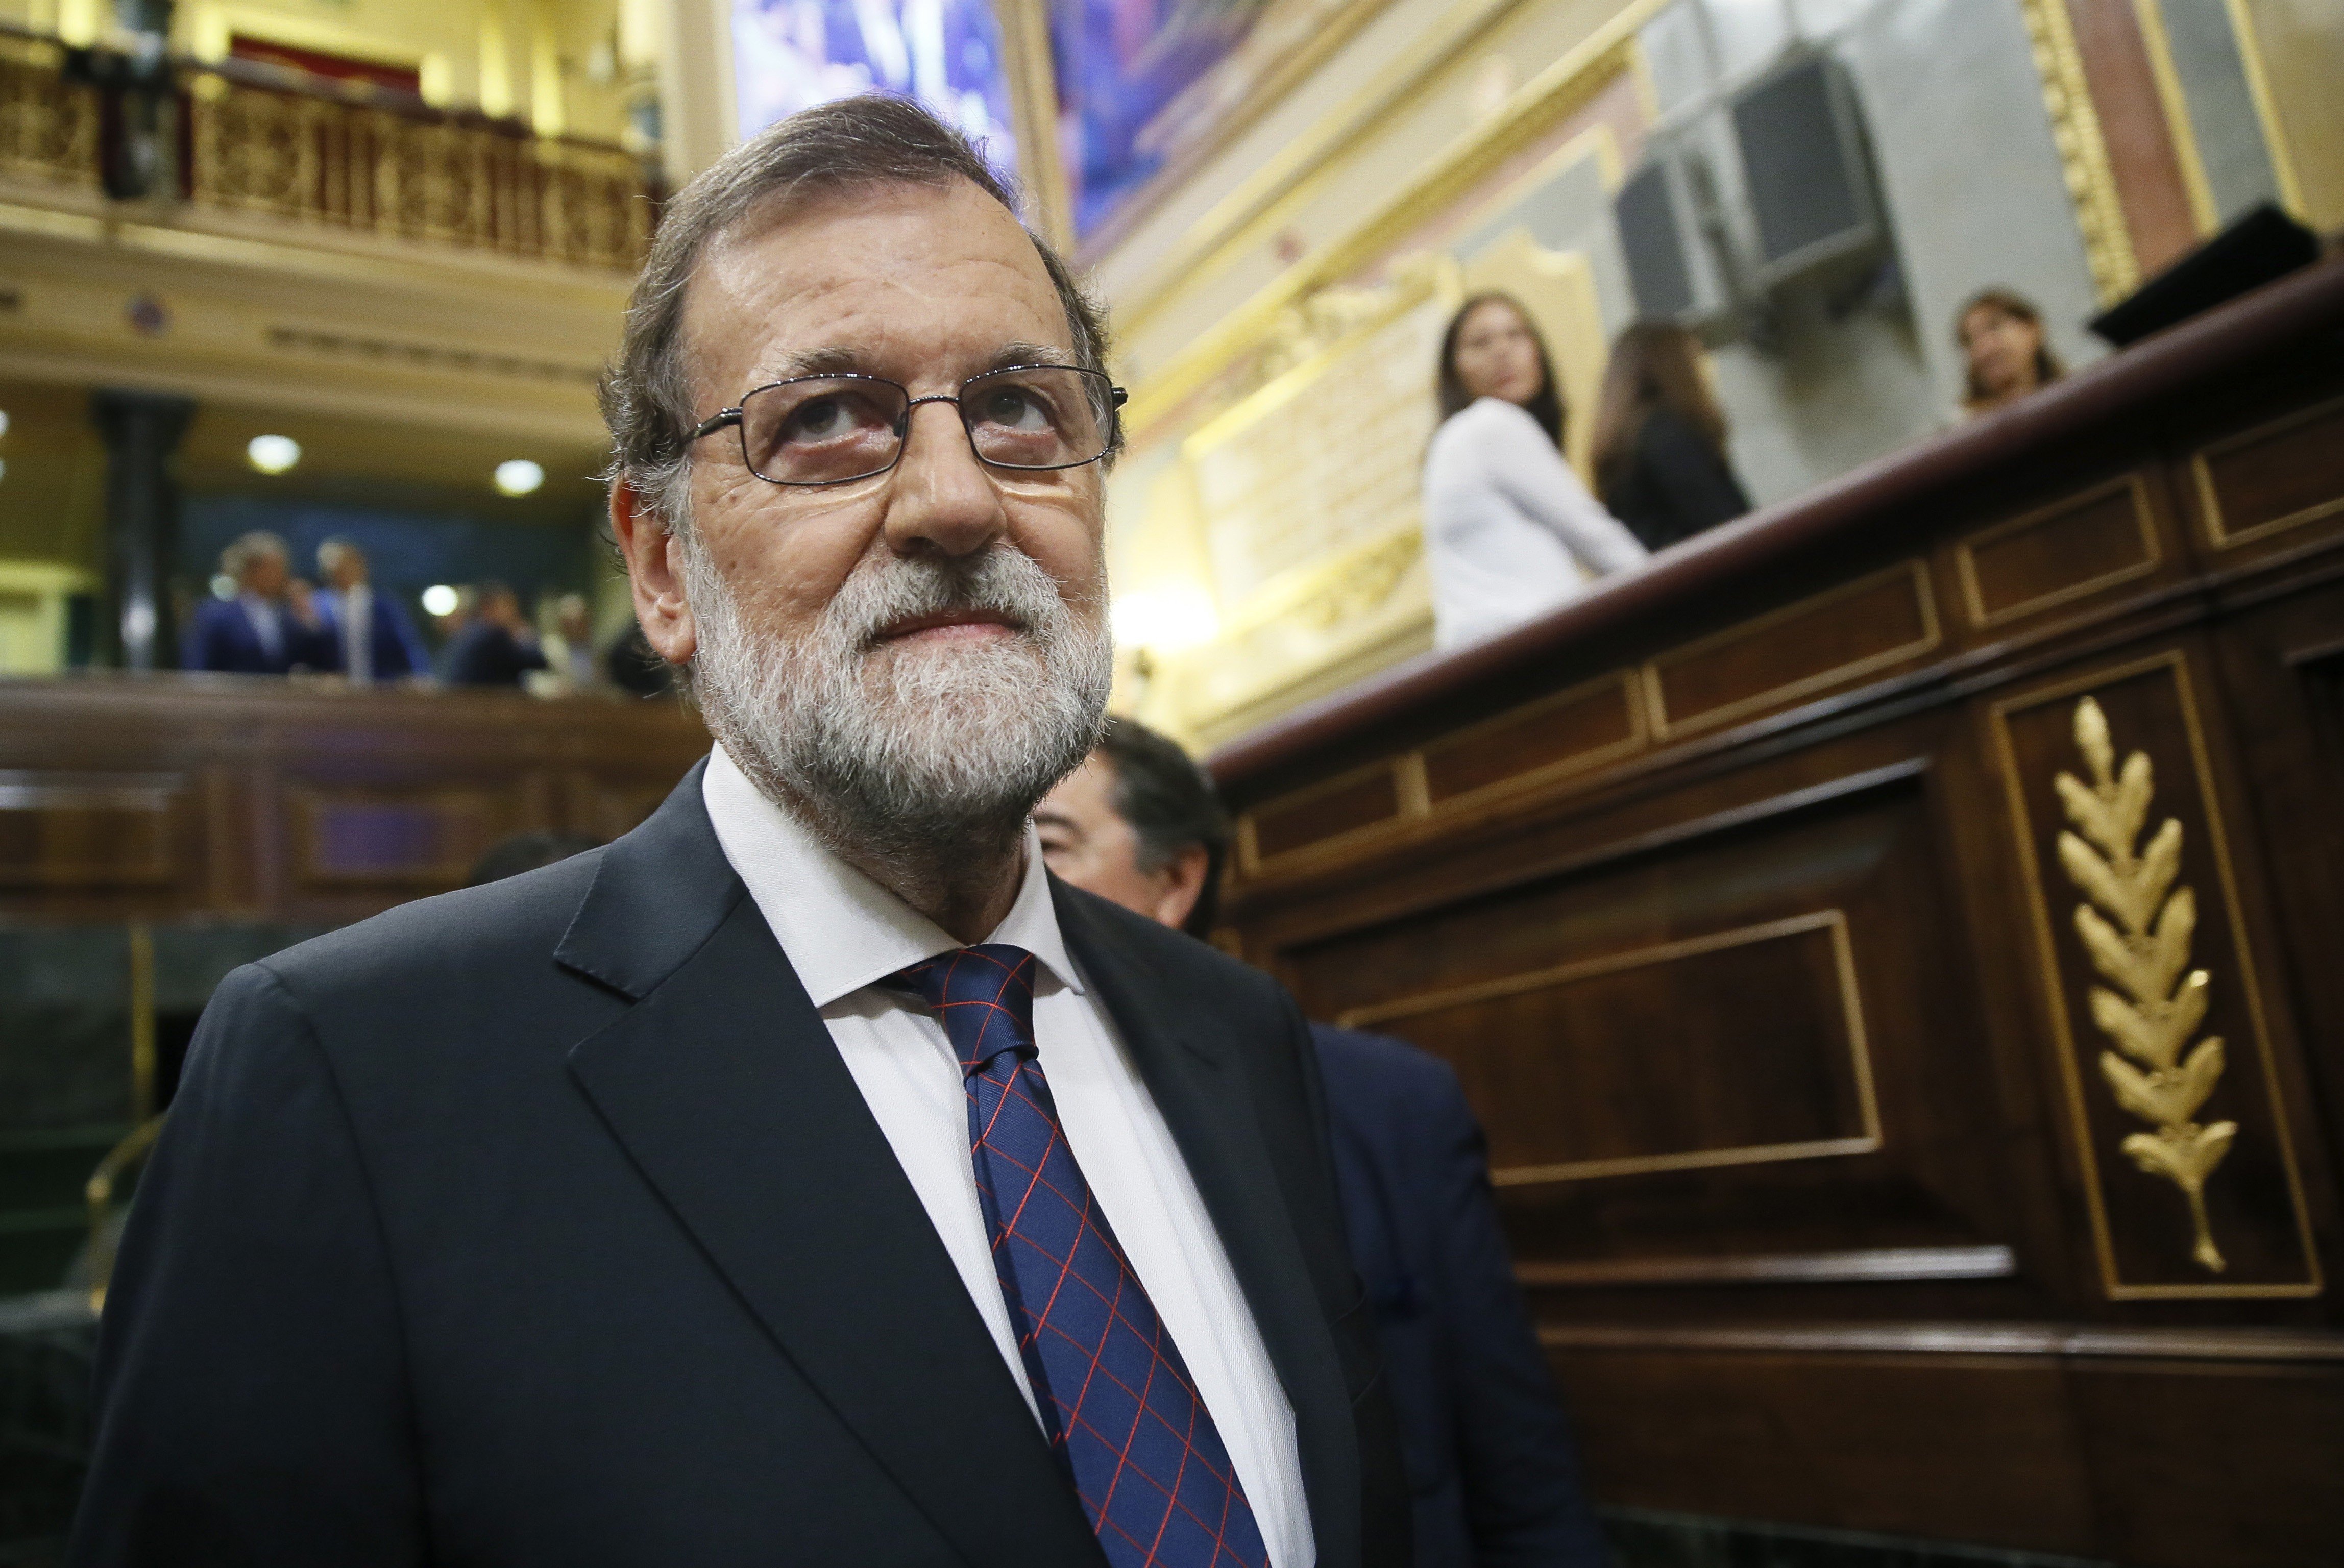 Rajoy calls Catalan independence an "autocratic project"; avoids PP corruption debate